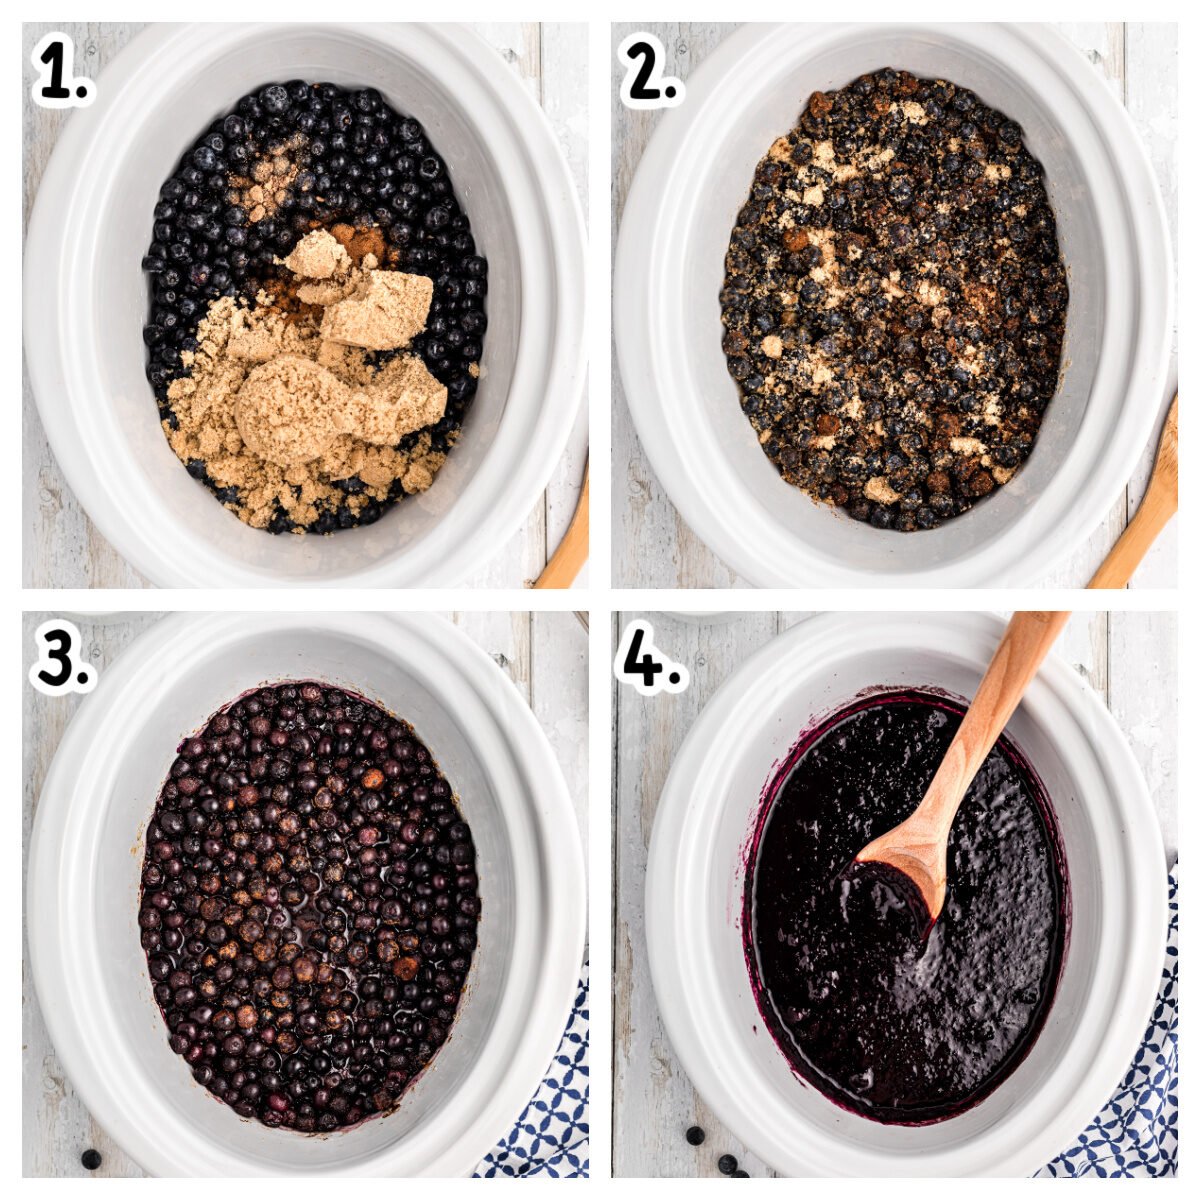 Four images showing how to make blueberry butter in a crockpot.